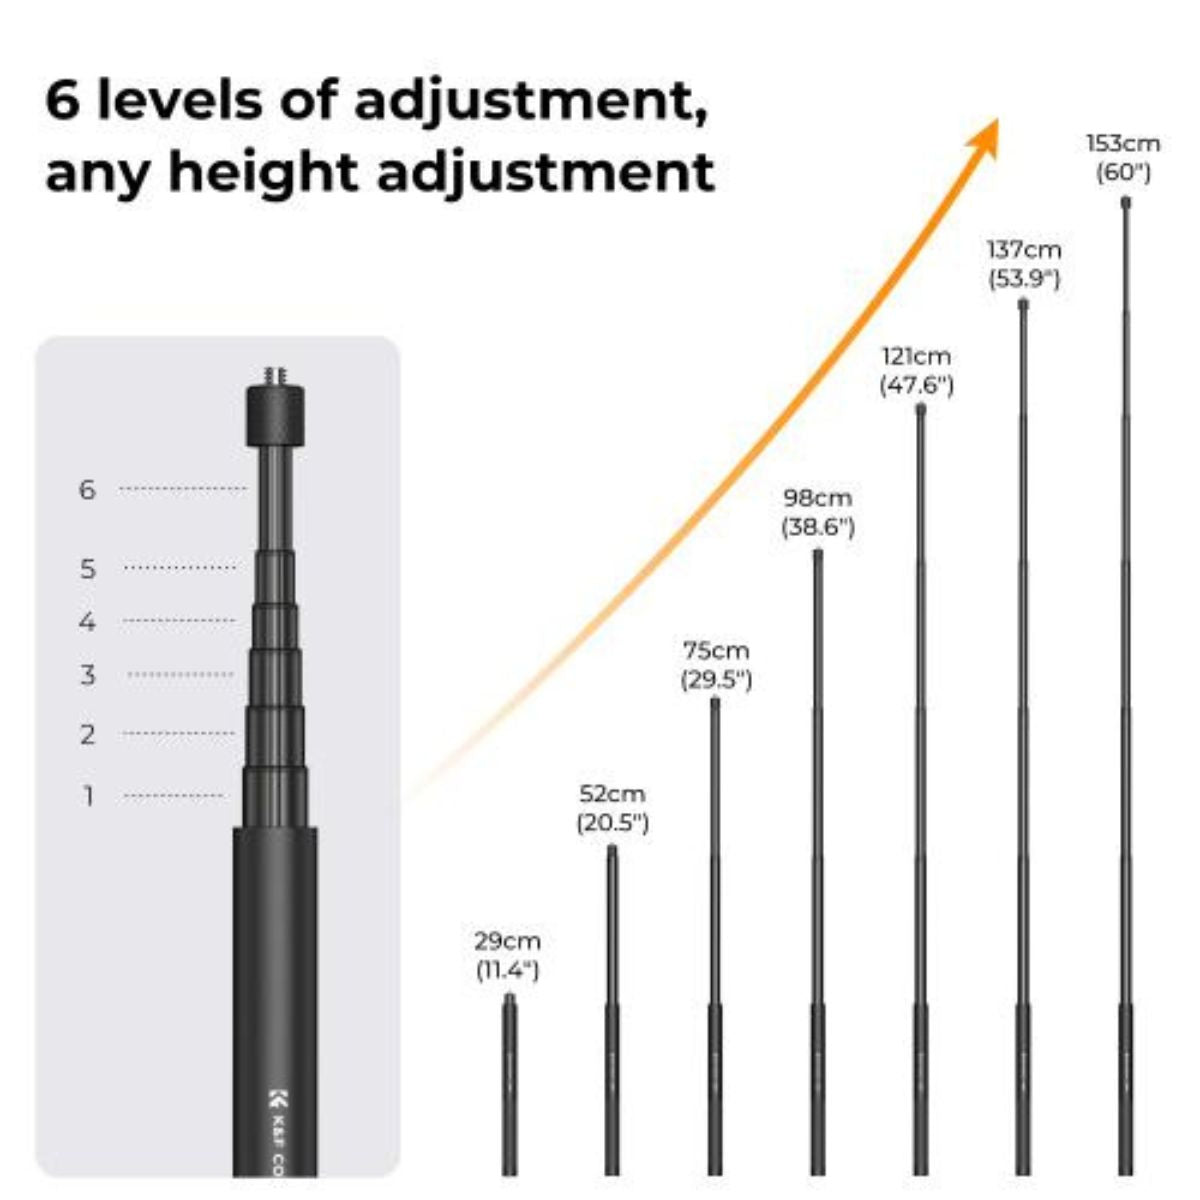 K&F Concept MS07 16m / 60 inch Adjustable Extension Pole Stick for Insta360 GoPro DJI Osmo Action Camera & Mobile Phone Holder